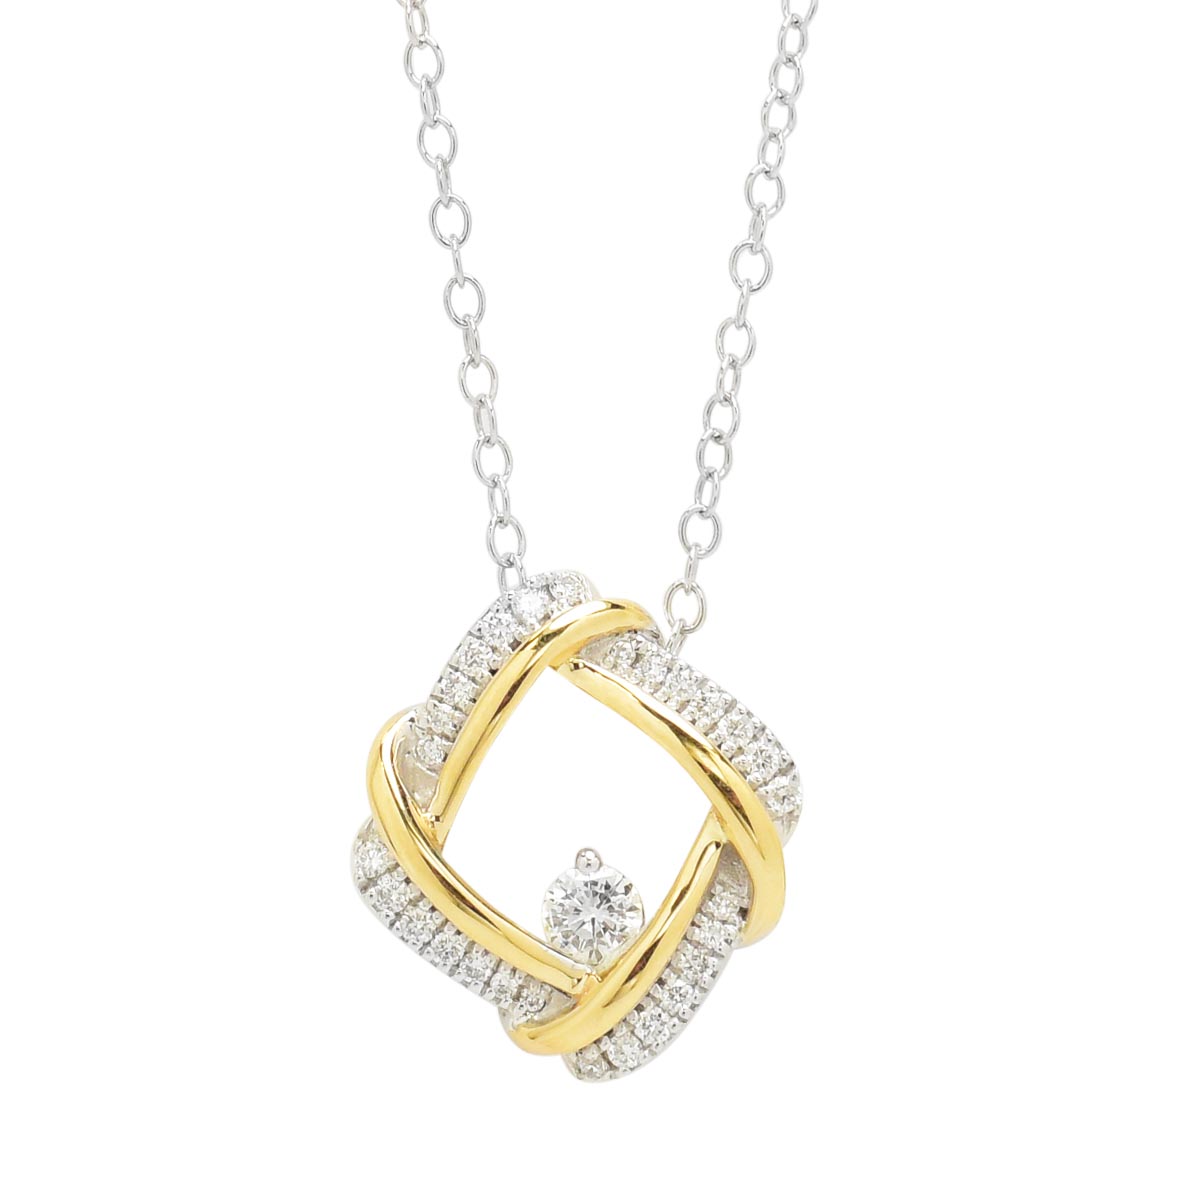 Northern Star Diamond Love Knot Collection Necklace in Sterling Silver and 10kt Yellow Gold (1/4ct tw)